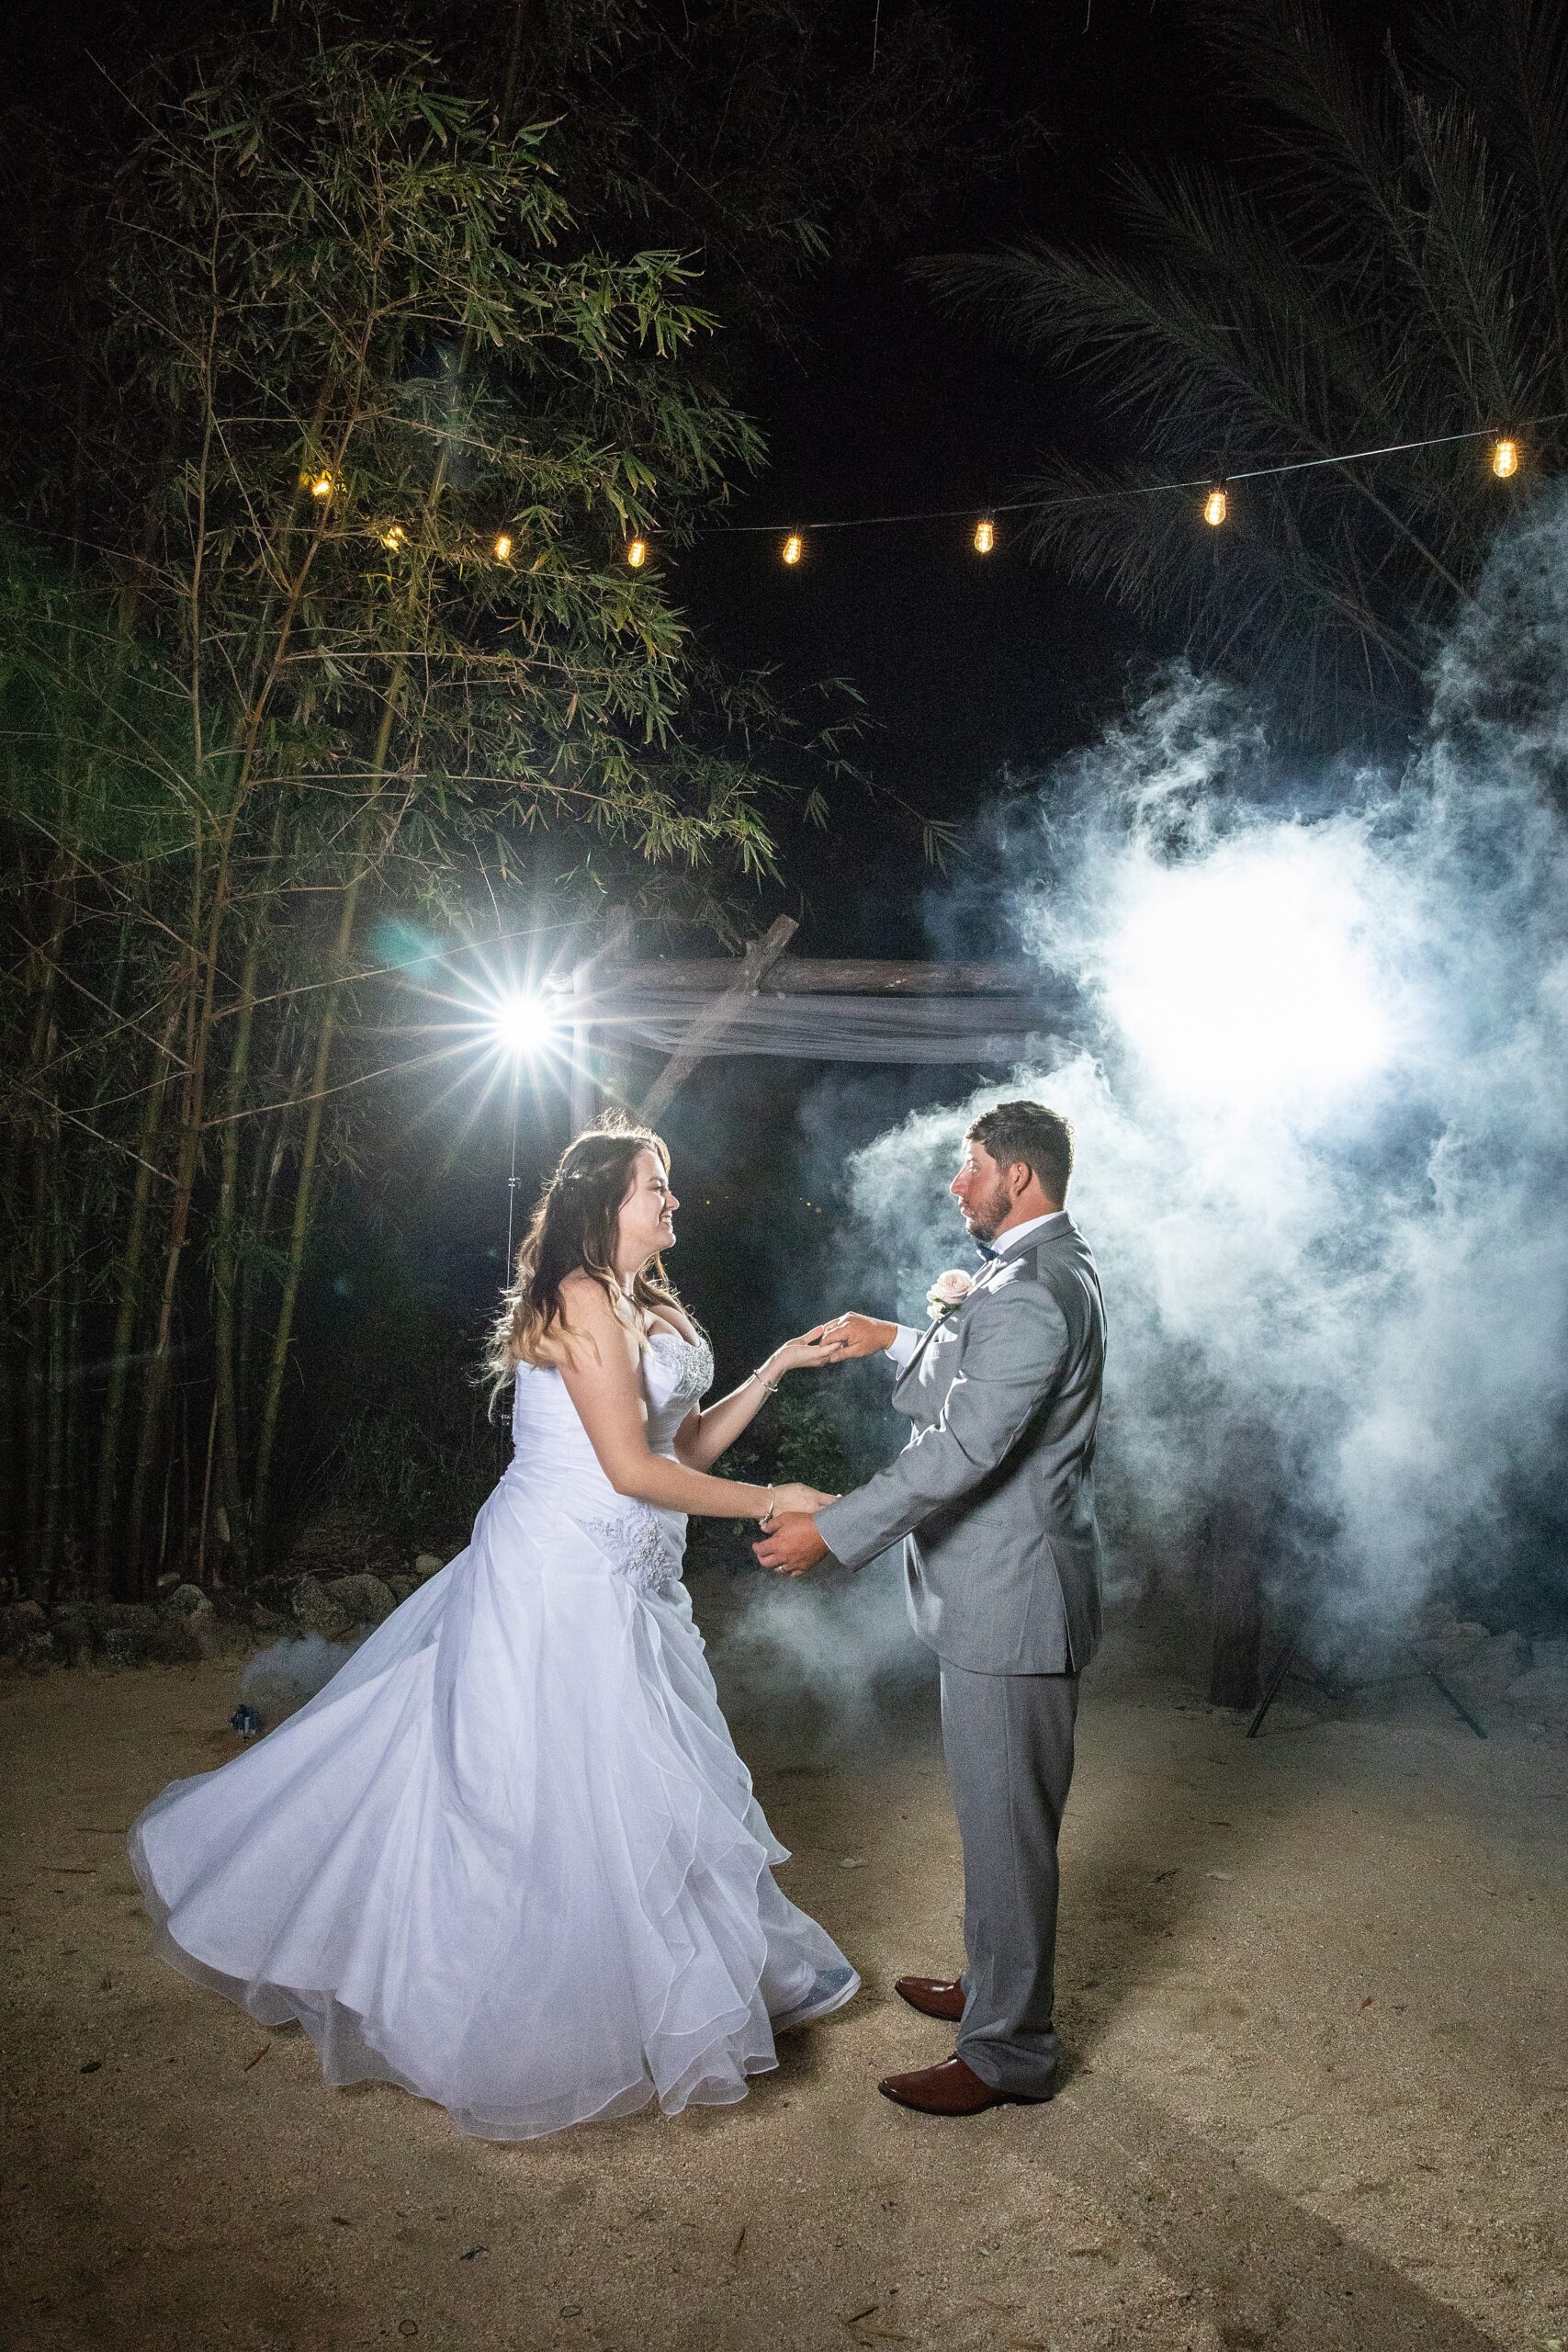 Newlyweds dance in a cloud of smoke outside under market lights at their wedding